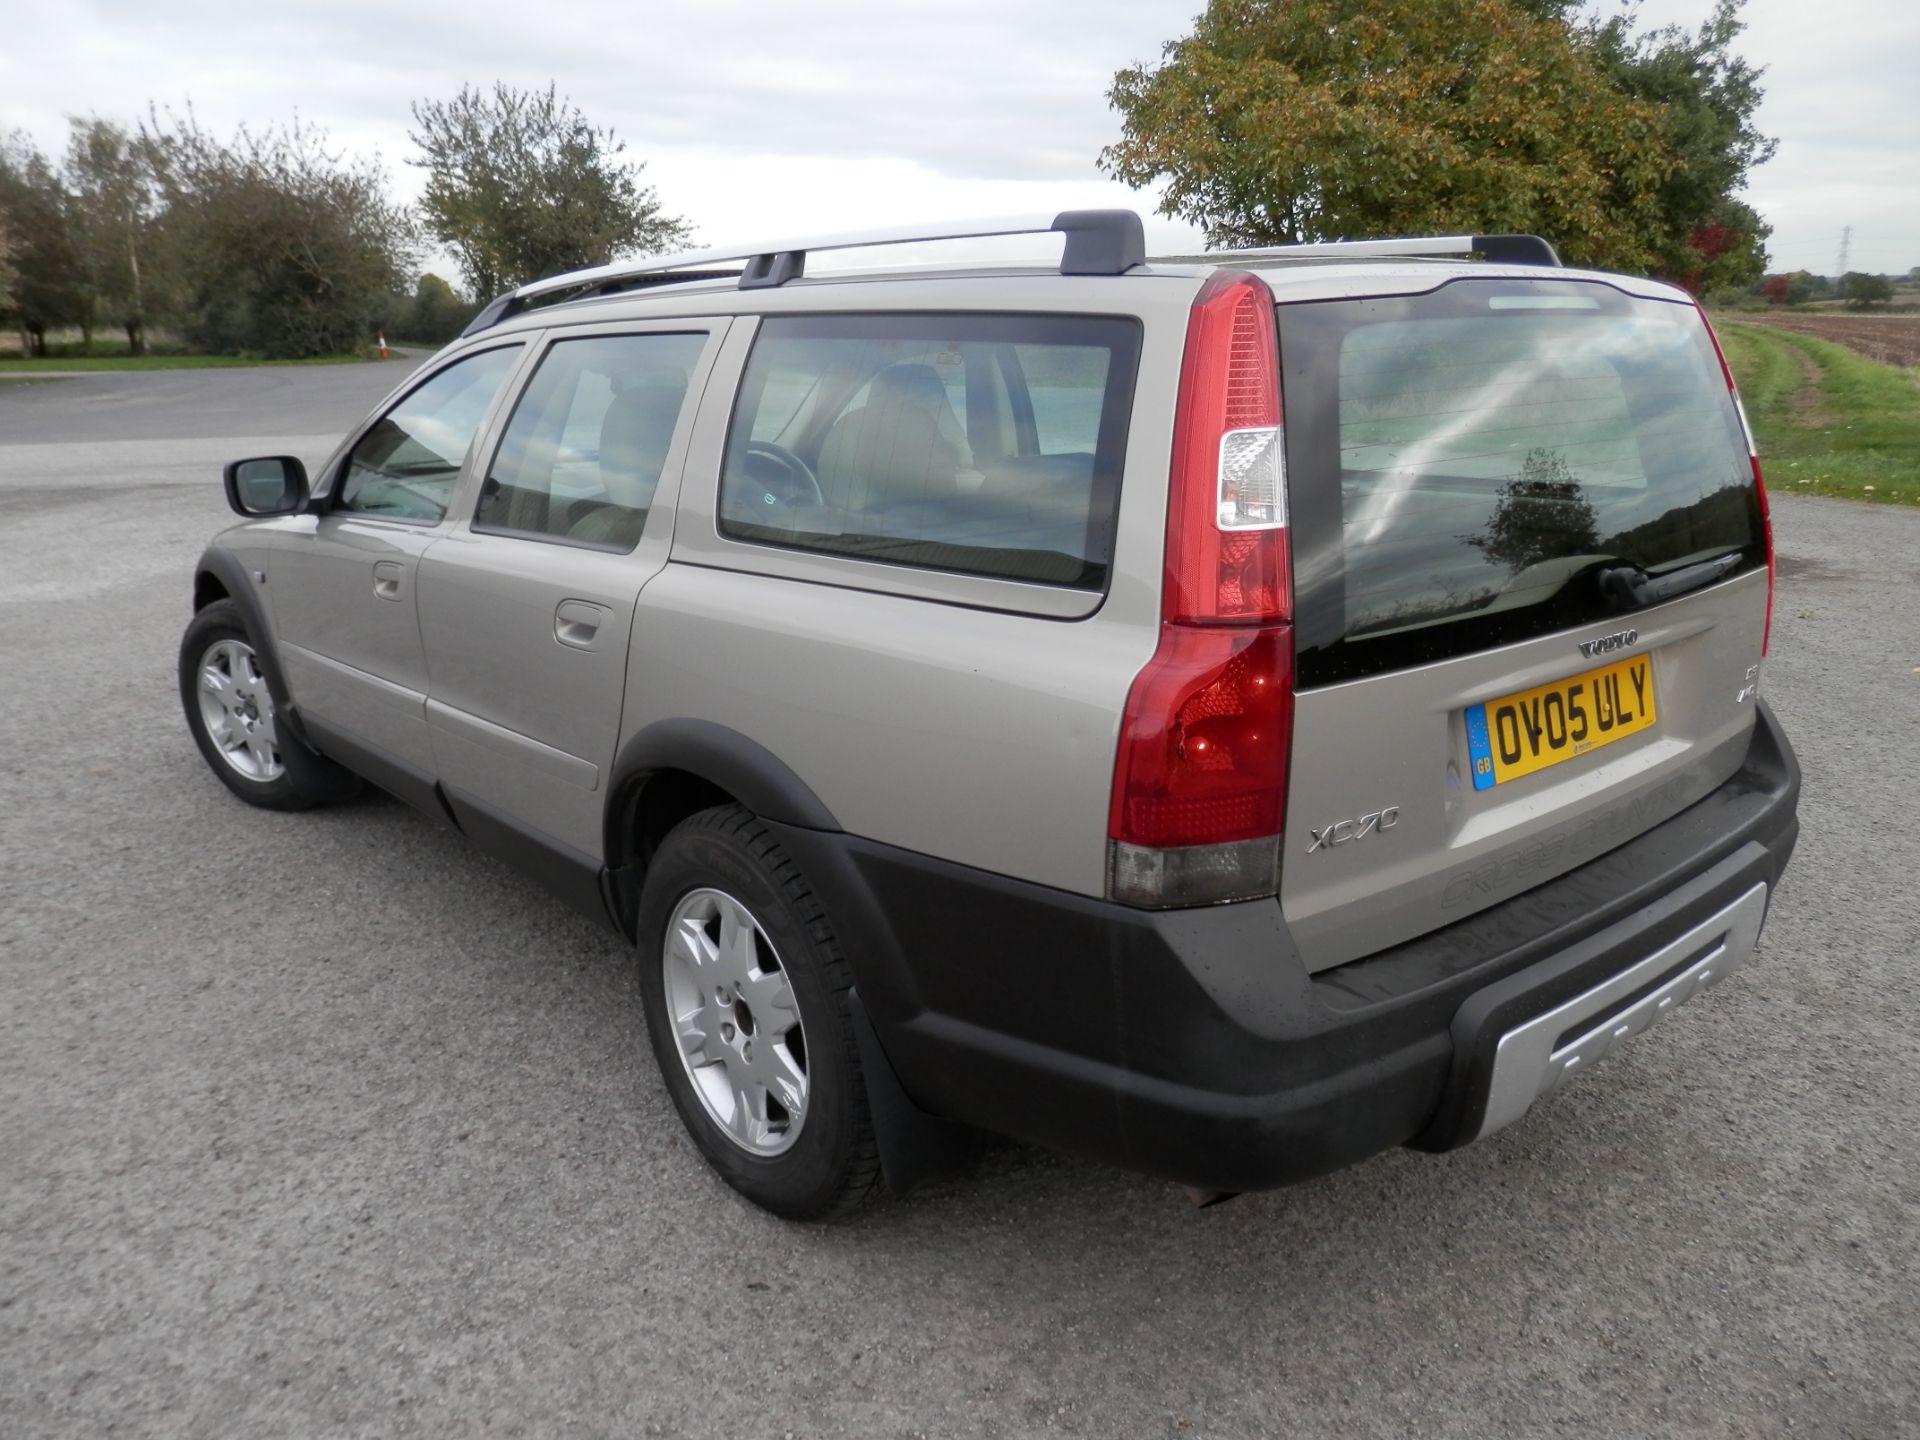 2005/05 VOLVO XC70 CROSS COUNTRY 2.4 D5 DIESEL AUTOMATIC, 4 WHEEL DRIVE, MOT MAY 2017, 150K MILES. - Image 5 of 26